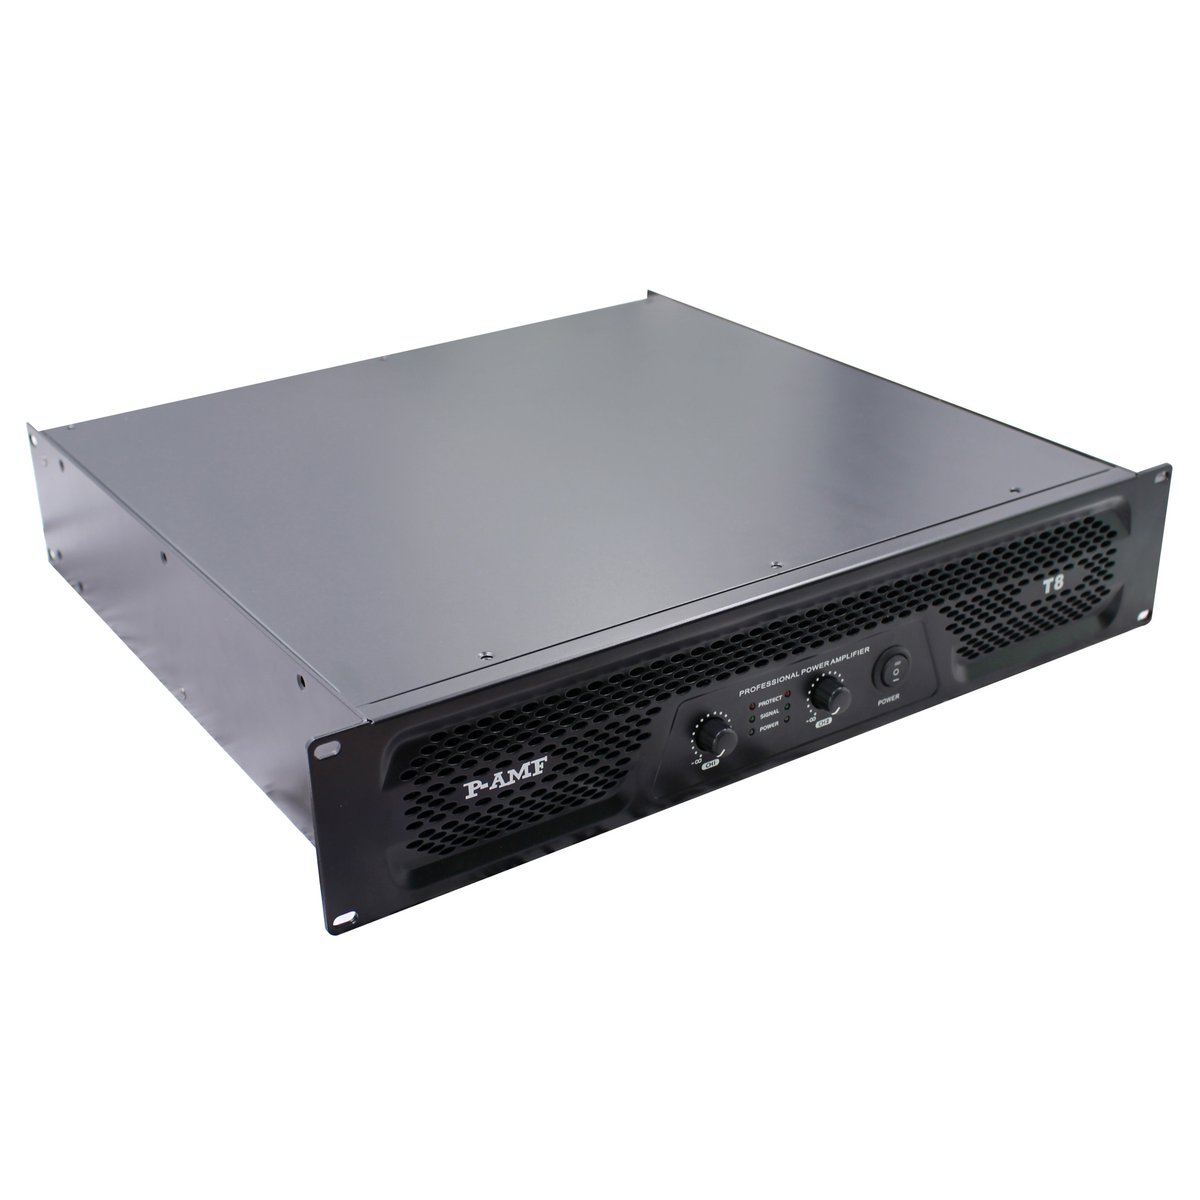 Professional Power Amplifier Two-Channel T Series Class H from 2 X 800W to 2 X 1200W brings good reputation to Foshan Shu bole Electronic Technology Co., Ltd. #professionalpoweramplifiertseries #hifiamp #professionalamplifier